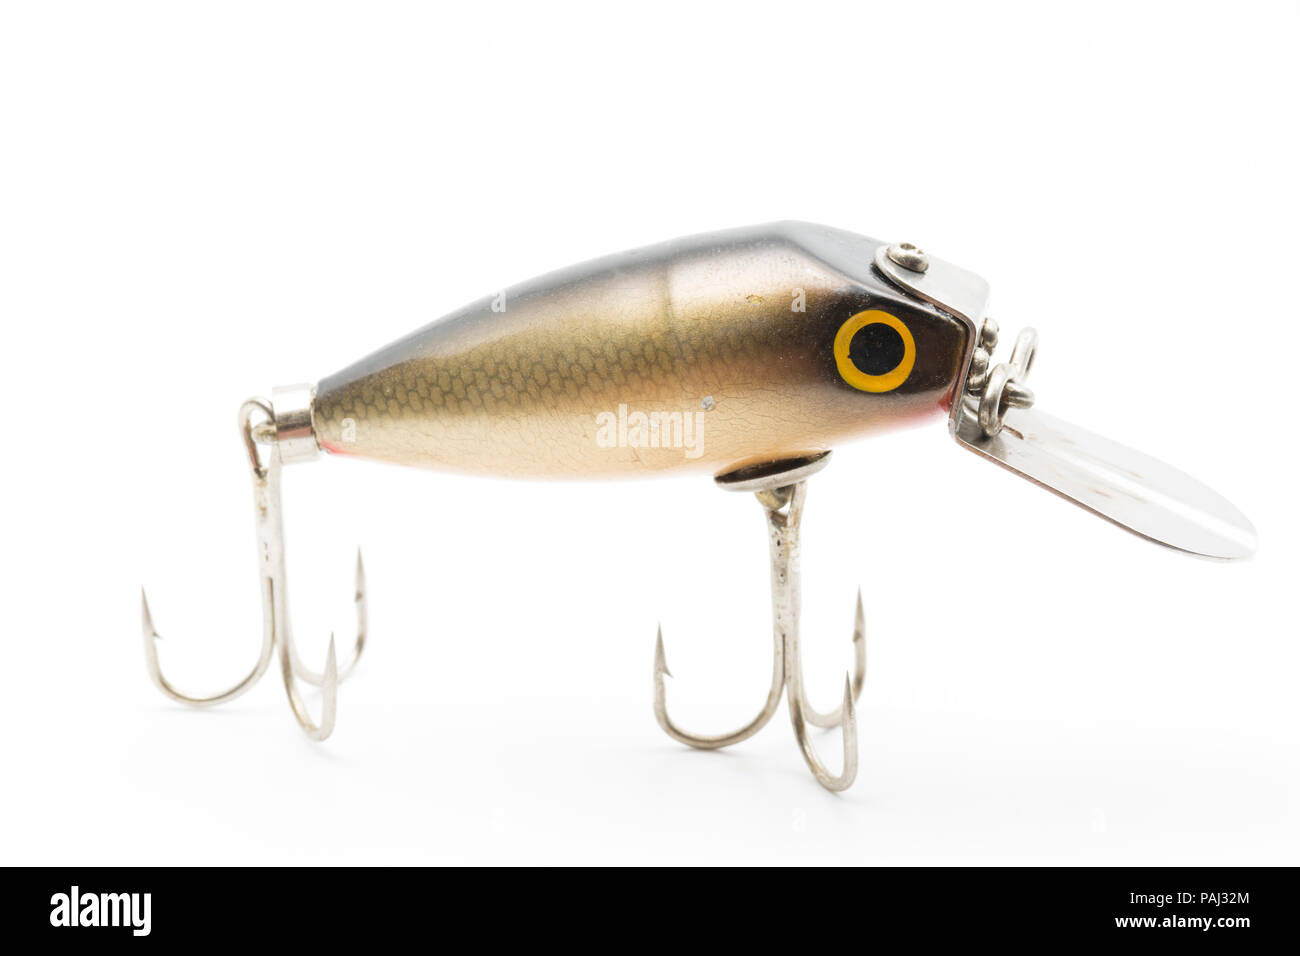 A single vintage fishing lure equipped with treble hooks, possibly by Woods MFG, on a white background. These types of lures for catching predatory fi Stock Photo